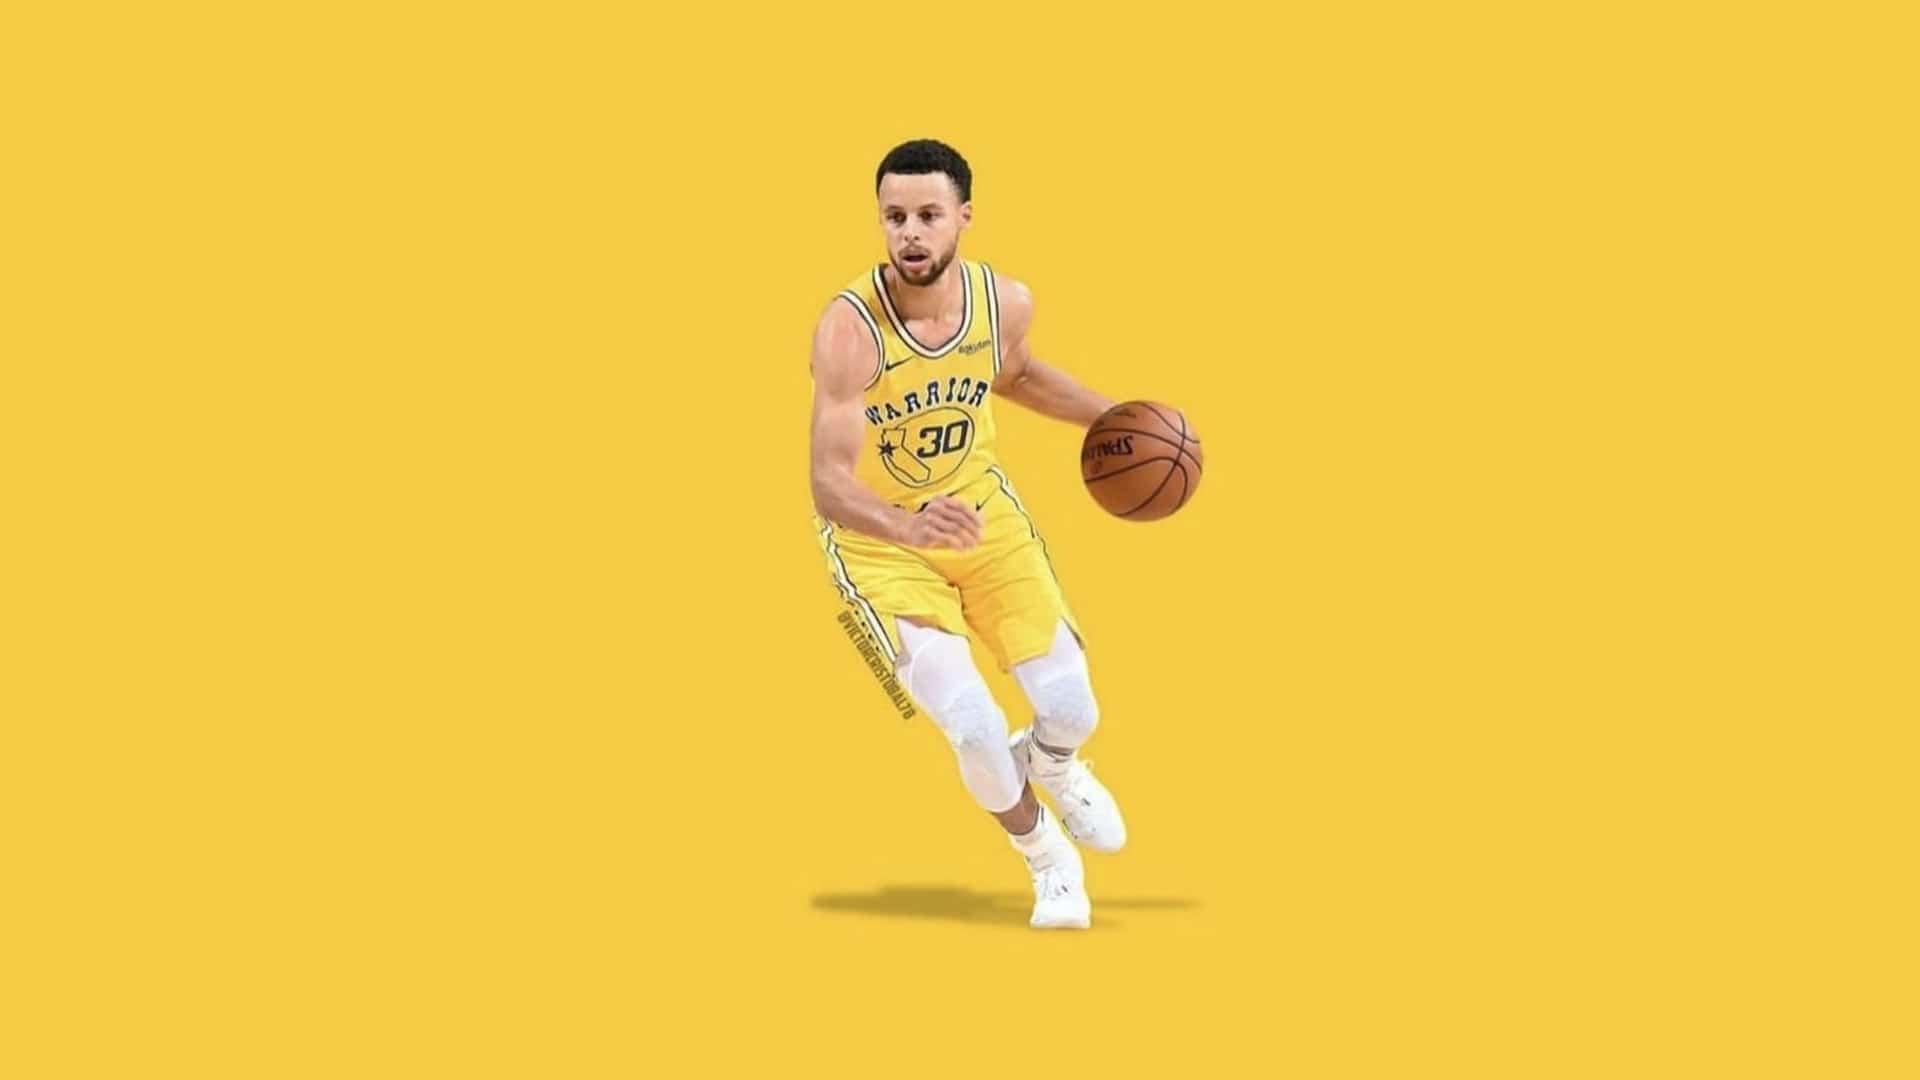 Stephen Curry starts off 2021 with a careerbest 62 points for the Warriors